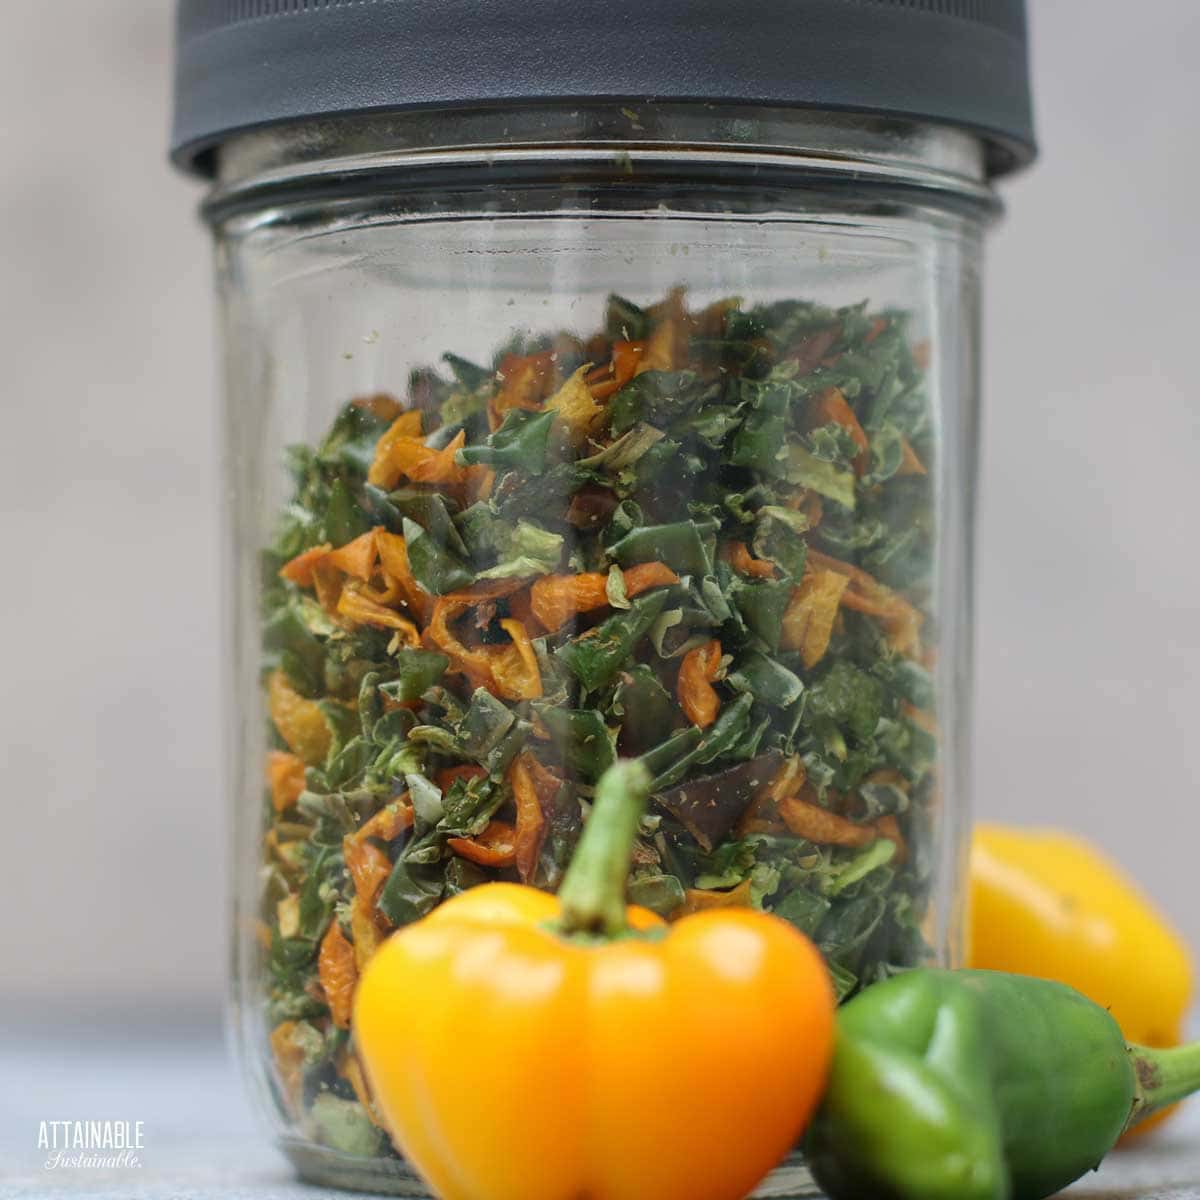 mixed yellow and green dehydrated peppers in a jar.